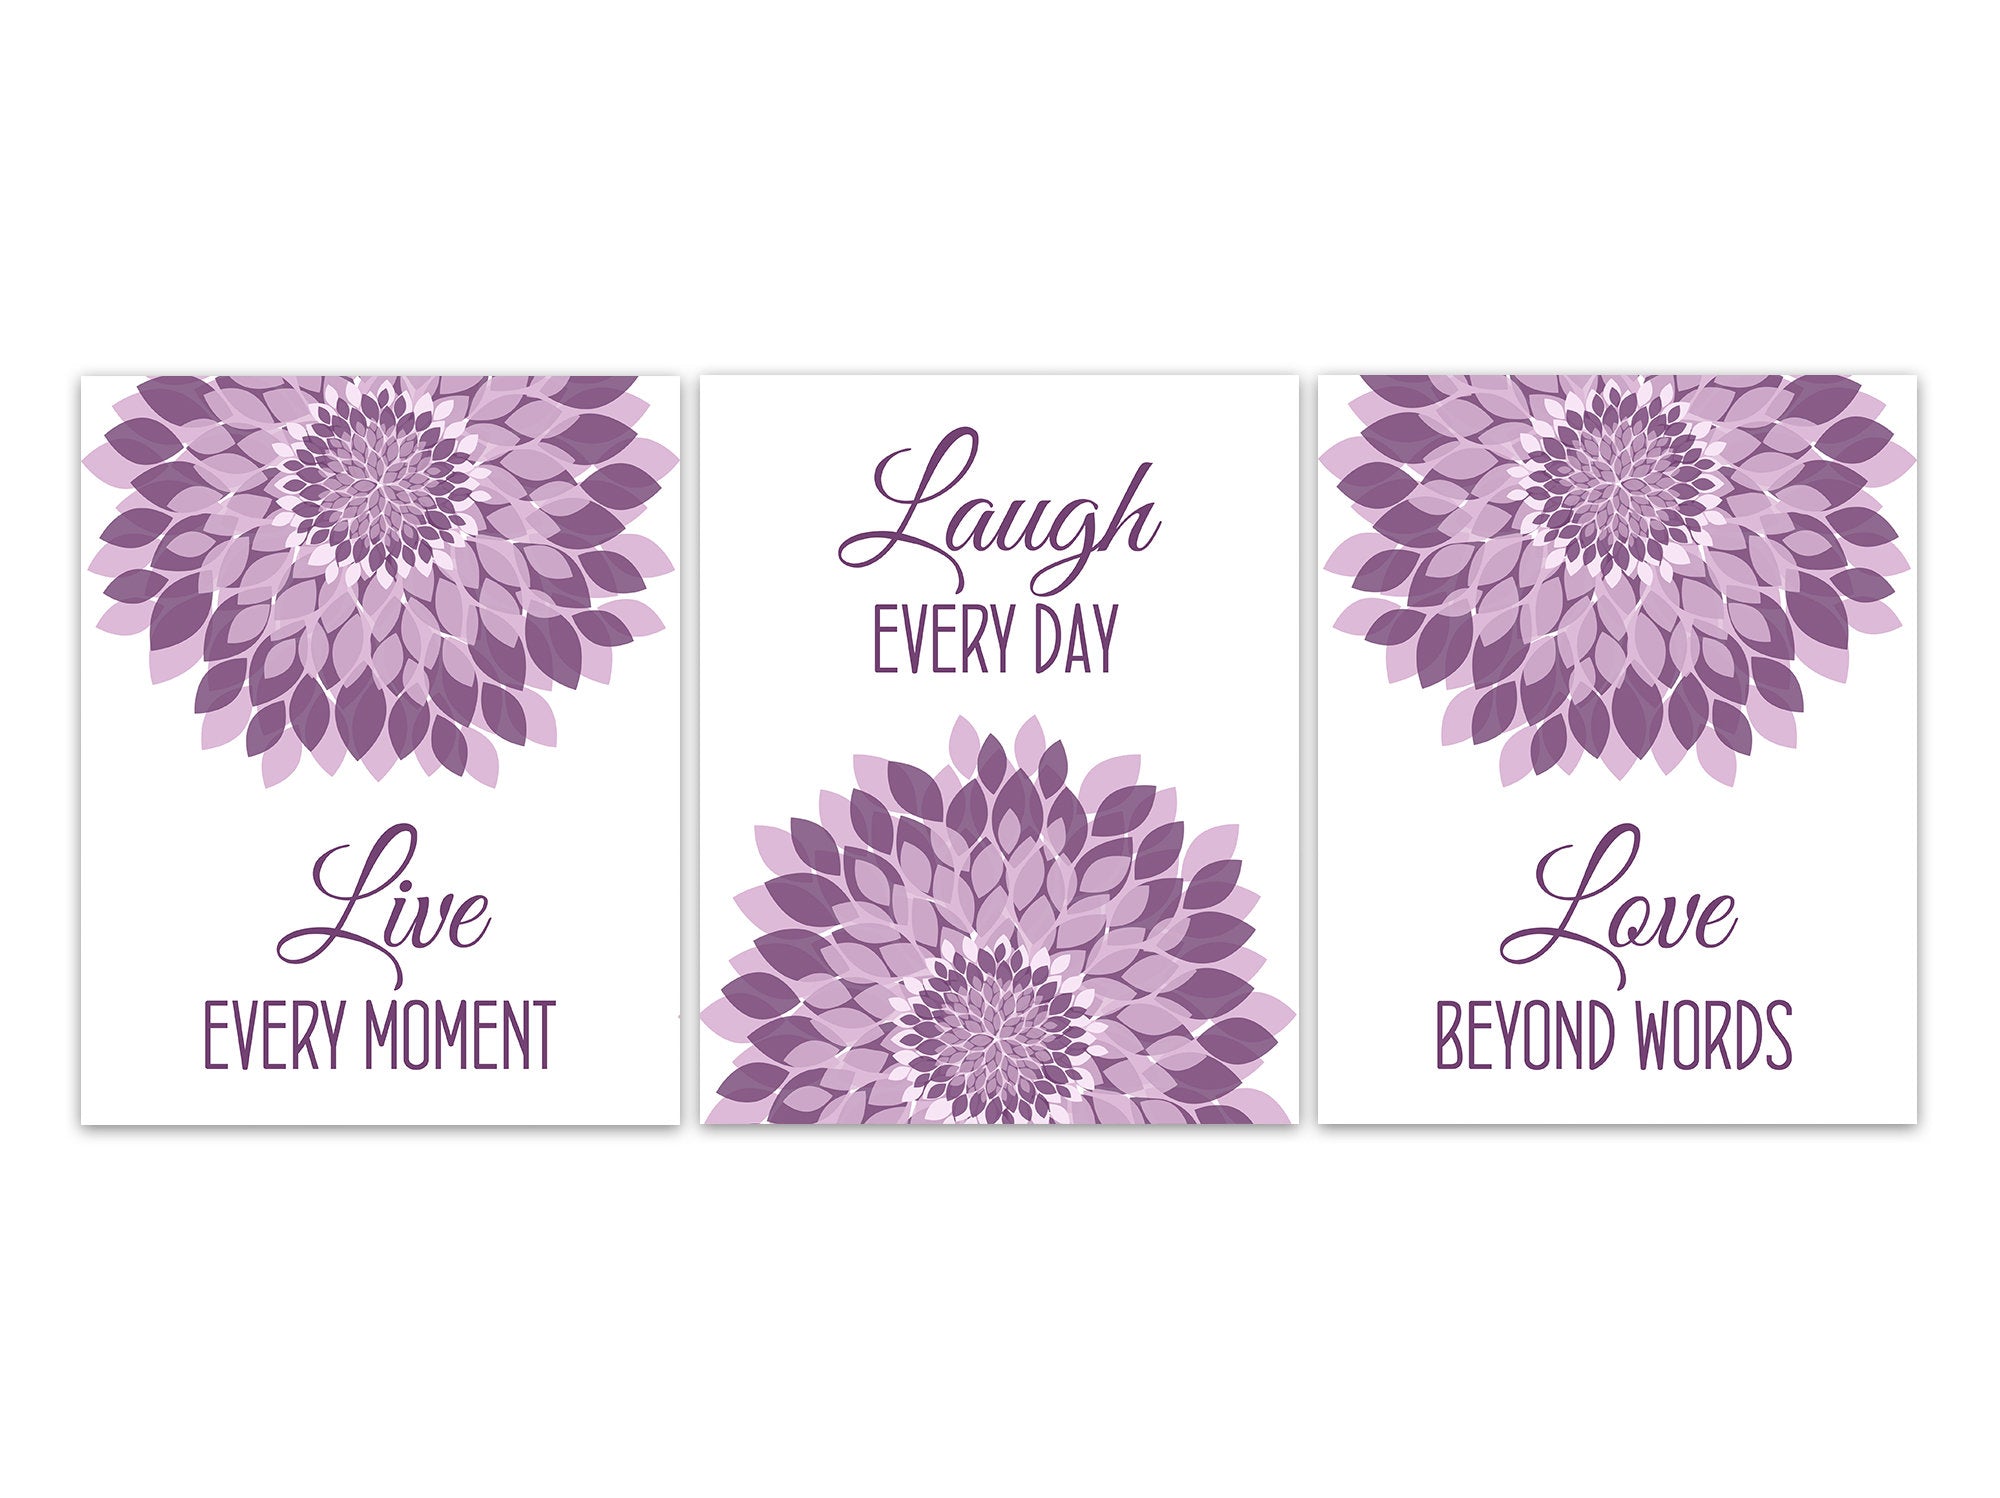 Live Every Moment, Laugh Every Day, Love Beyond Words, Purple Home Decor Wall Art, Minimalist Decor, Family Room Sign - HOME668